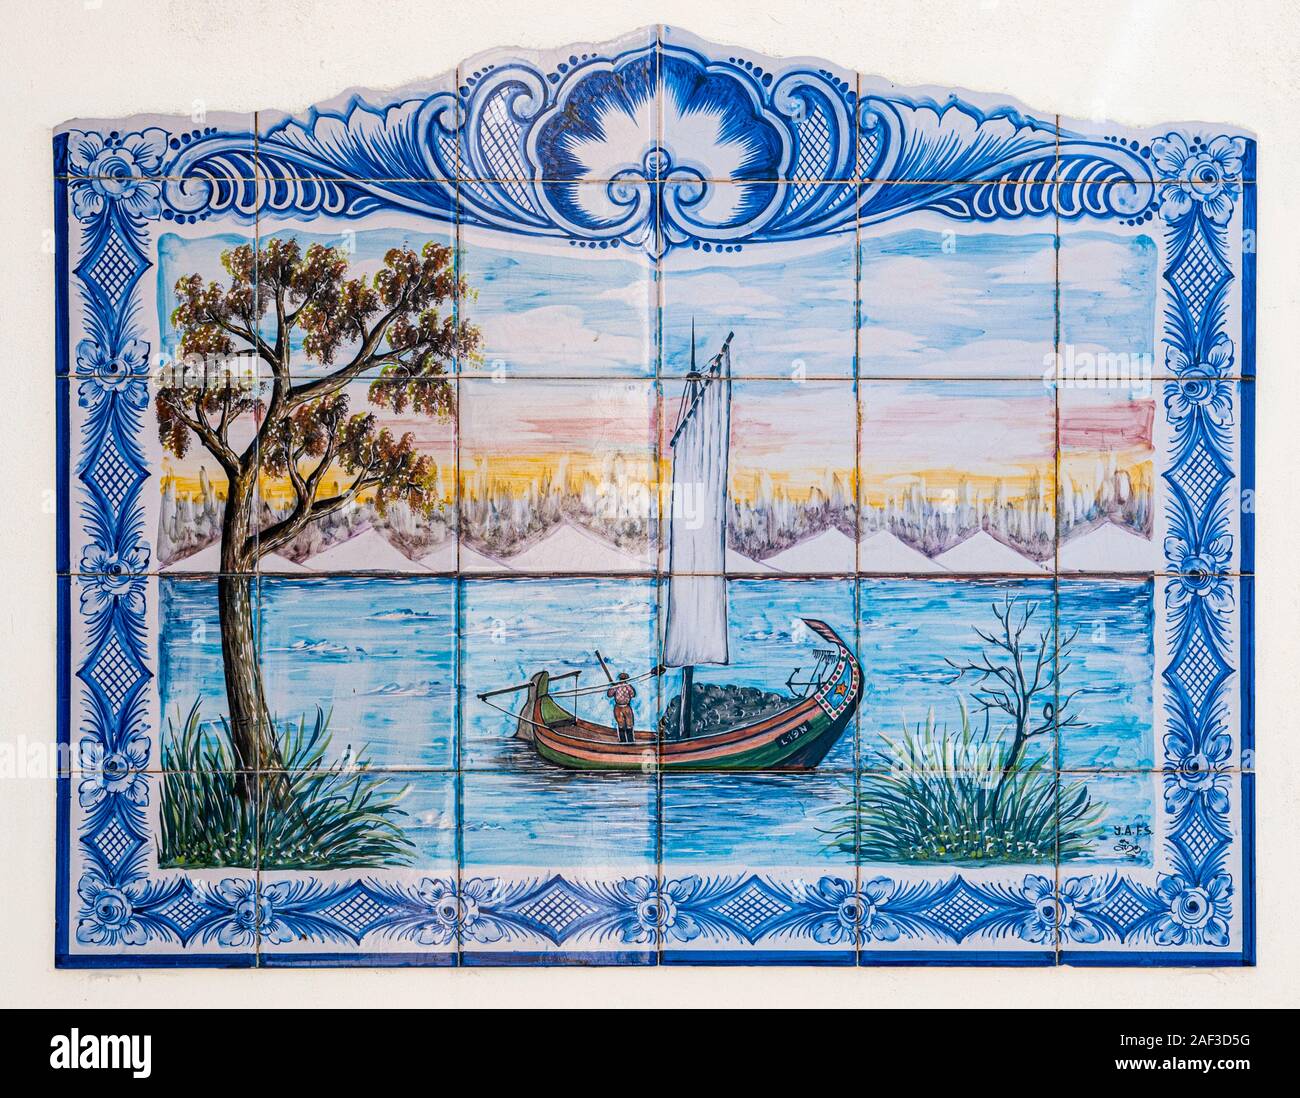 Traditional Portuguese painted tiles (Azulejos) depicting a sail boat harvesting seaweed in the Aveiro Lagoon, Portugal Stock Photo